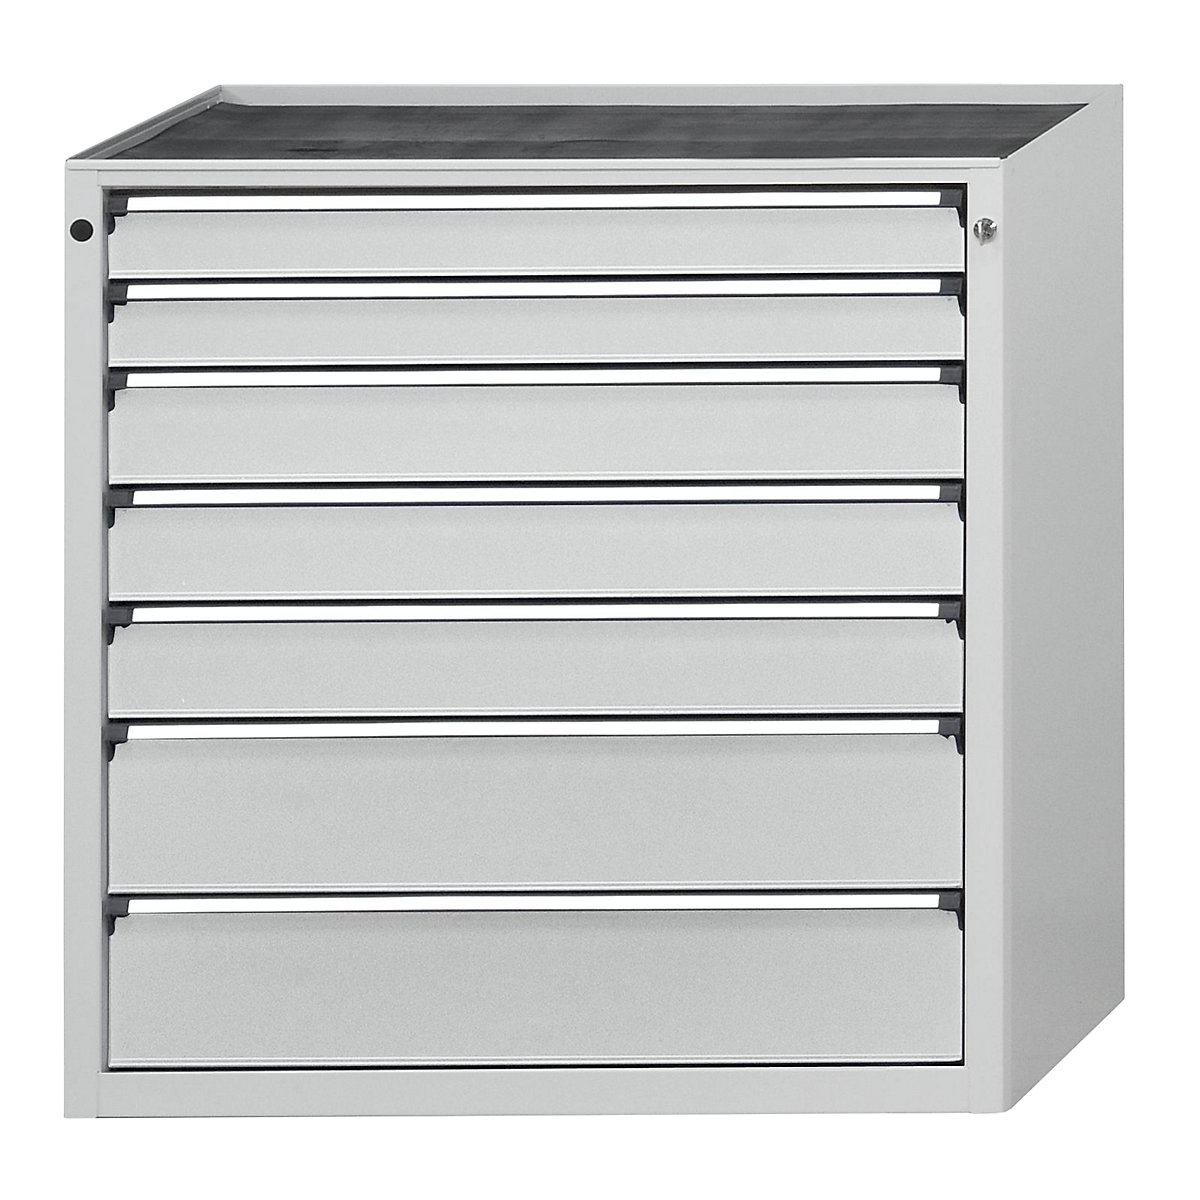 Drawer cupboard – ANKE, WxD 910 x 675 mm, 7 drawers, height 980 mm, front in light grey-15